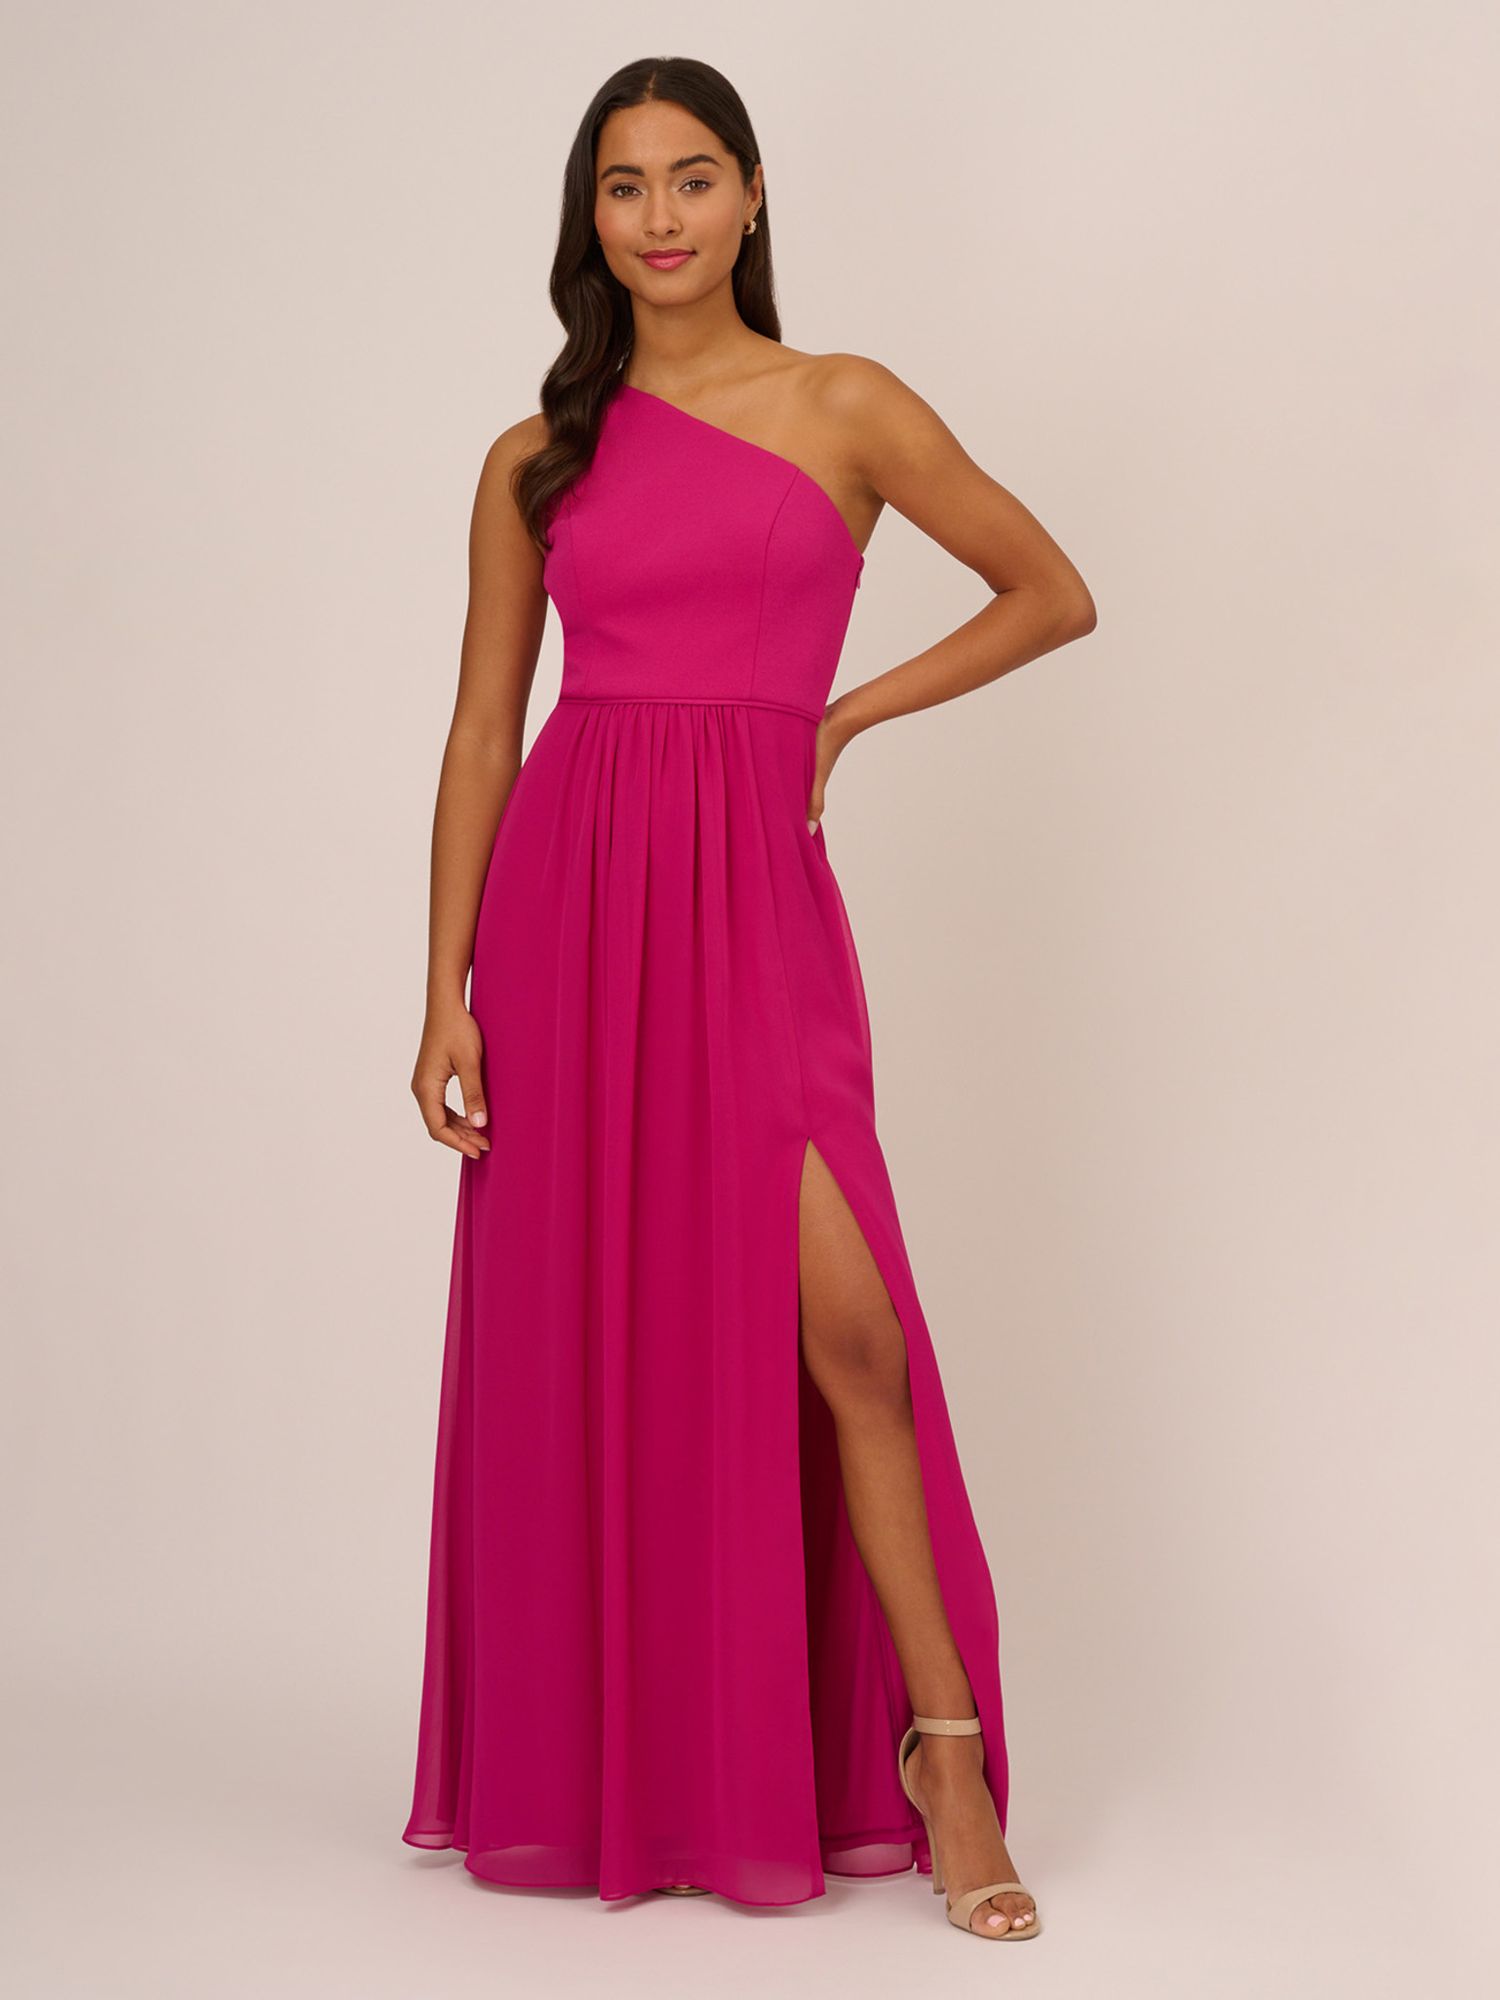 Adrianna Papell One Shoulder Chiffon Gown, Bright Magenta, 6